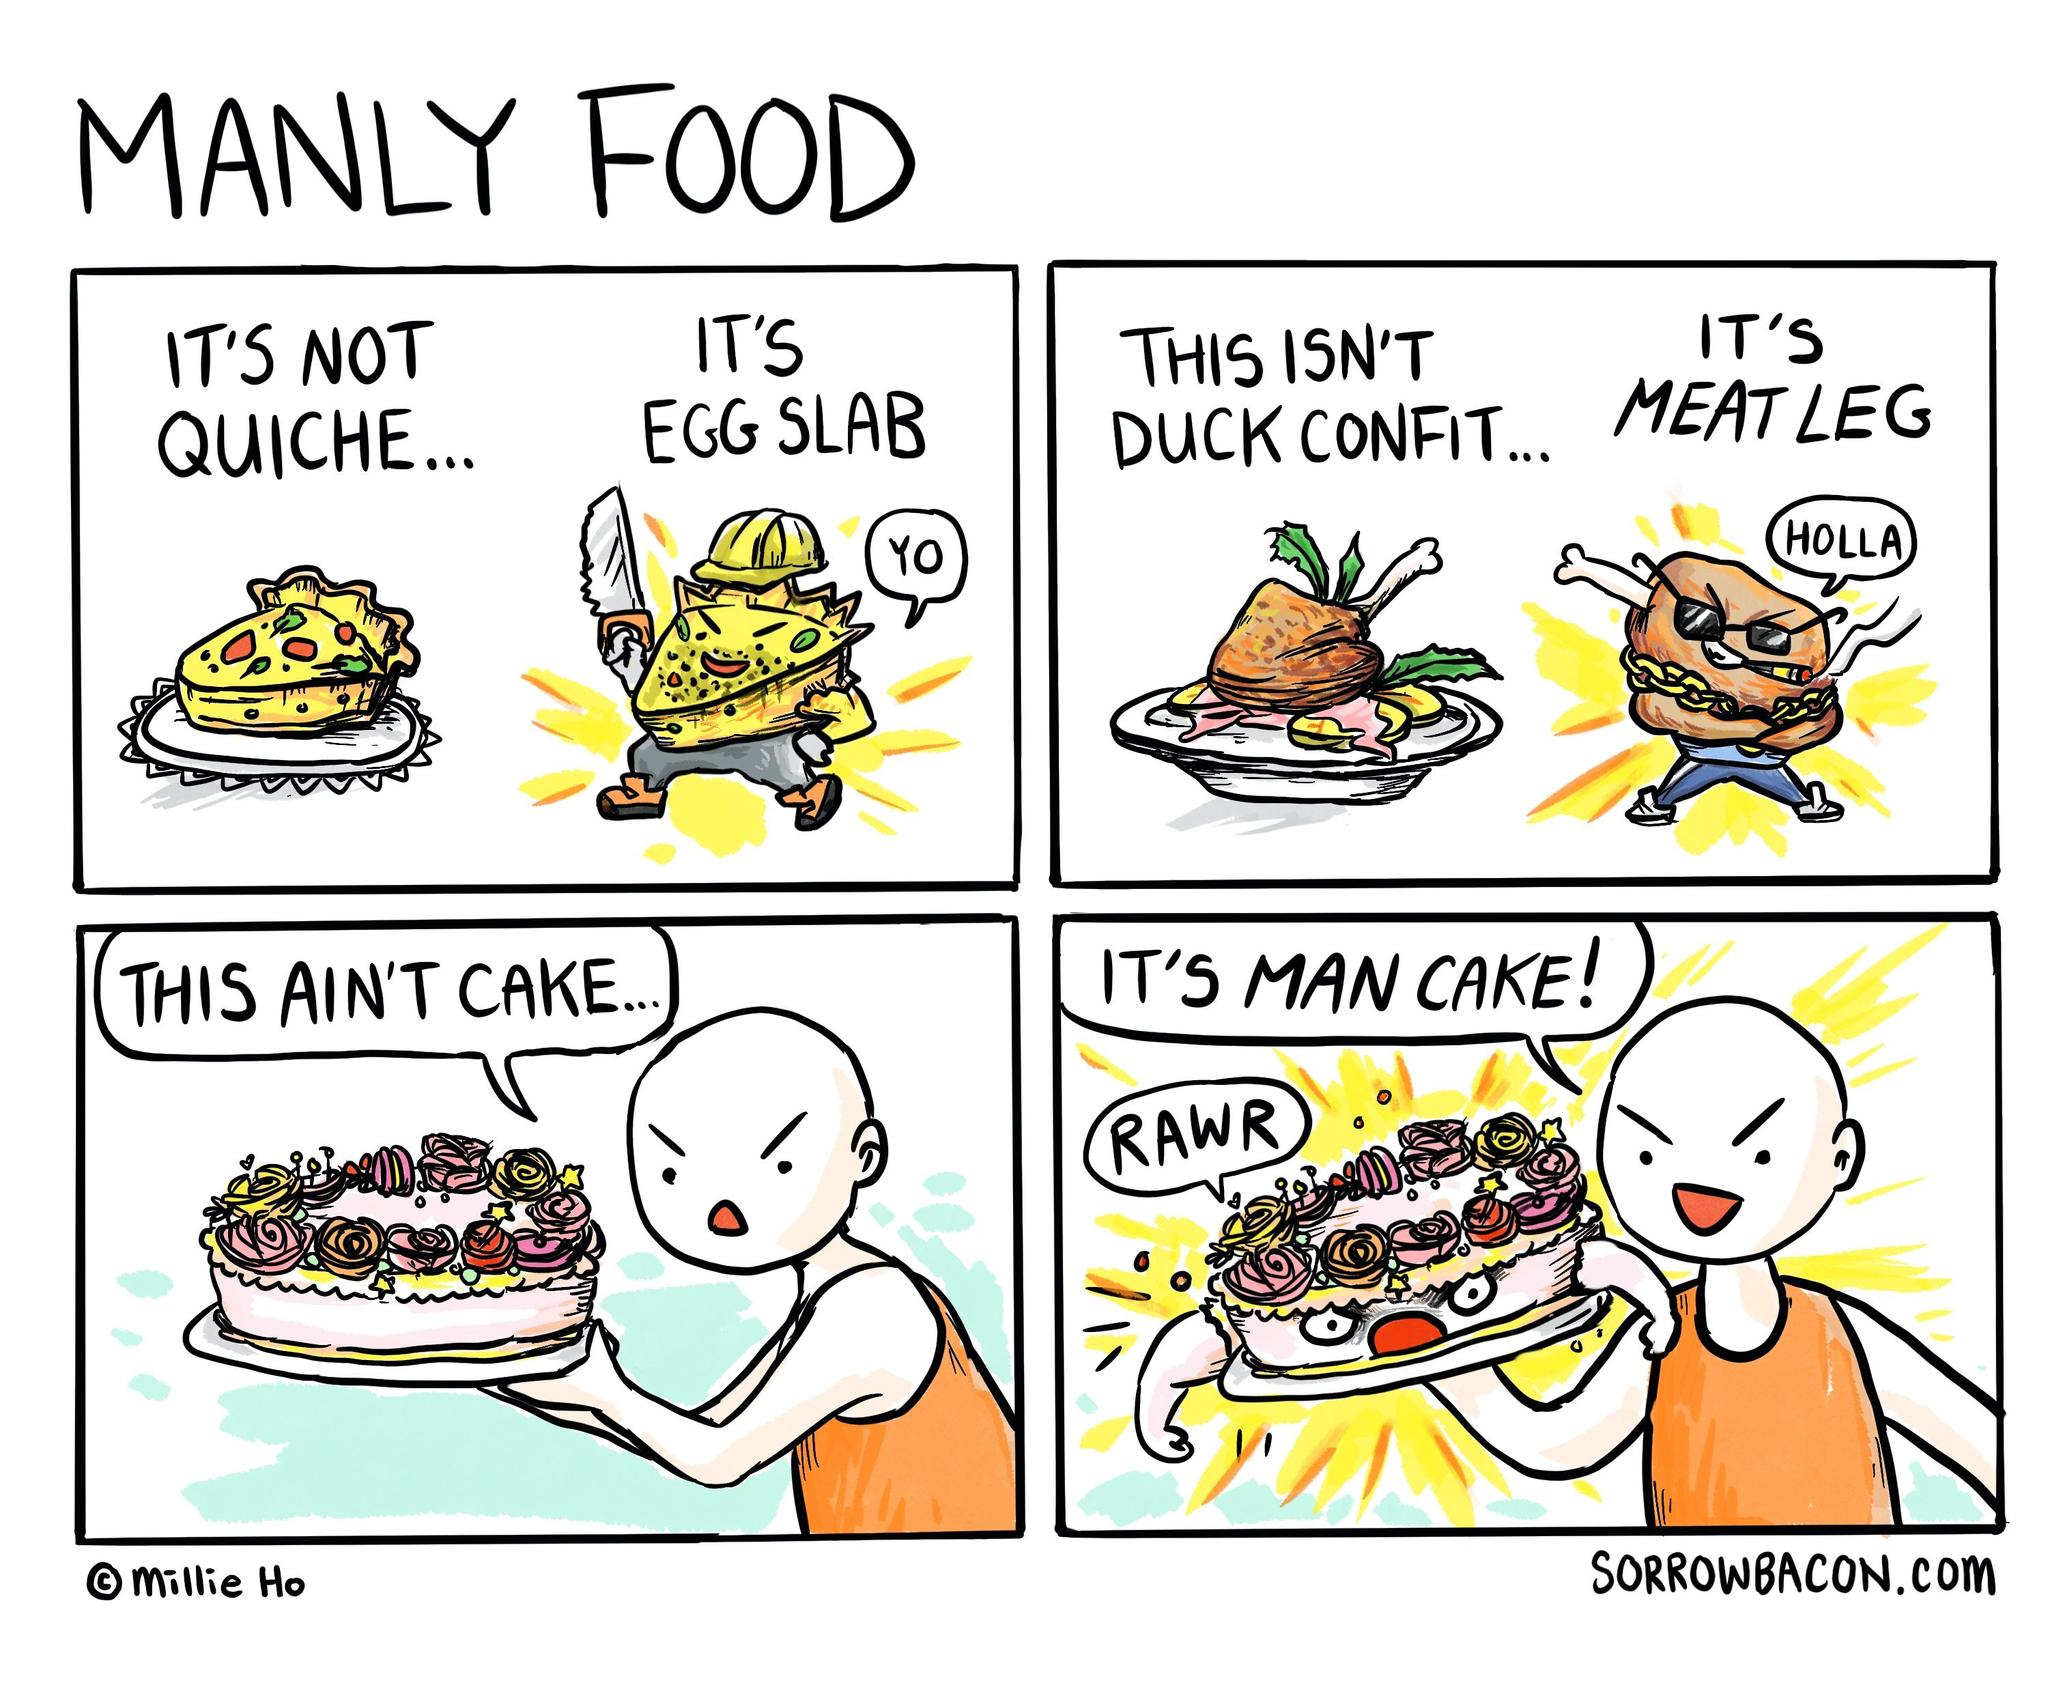 Manly Food sorrowbacon comic